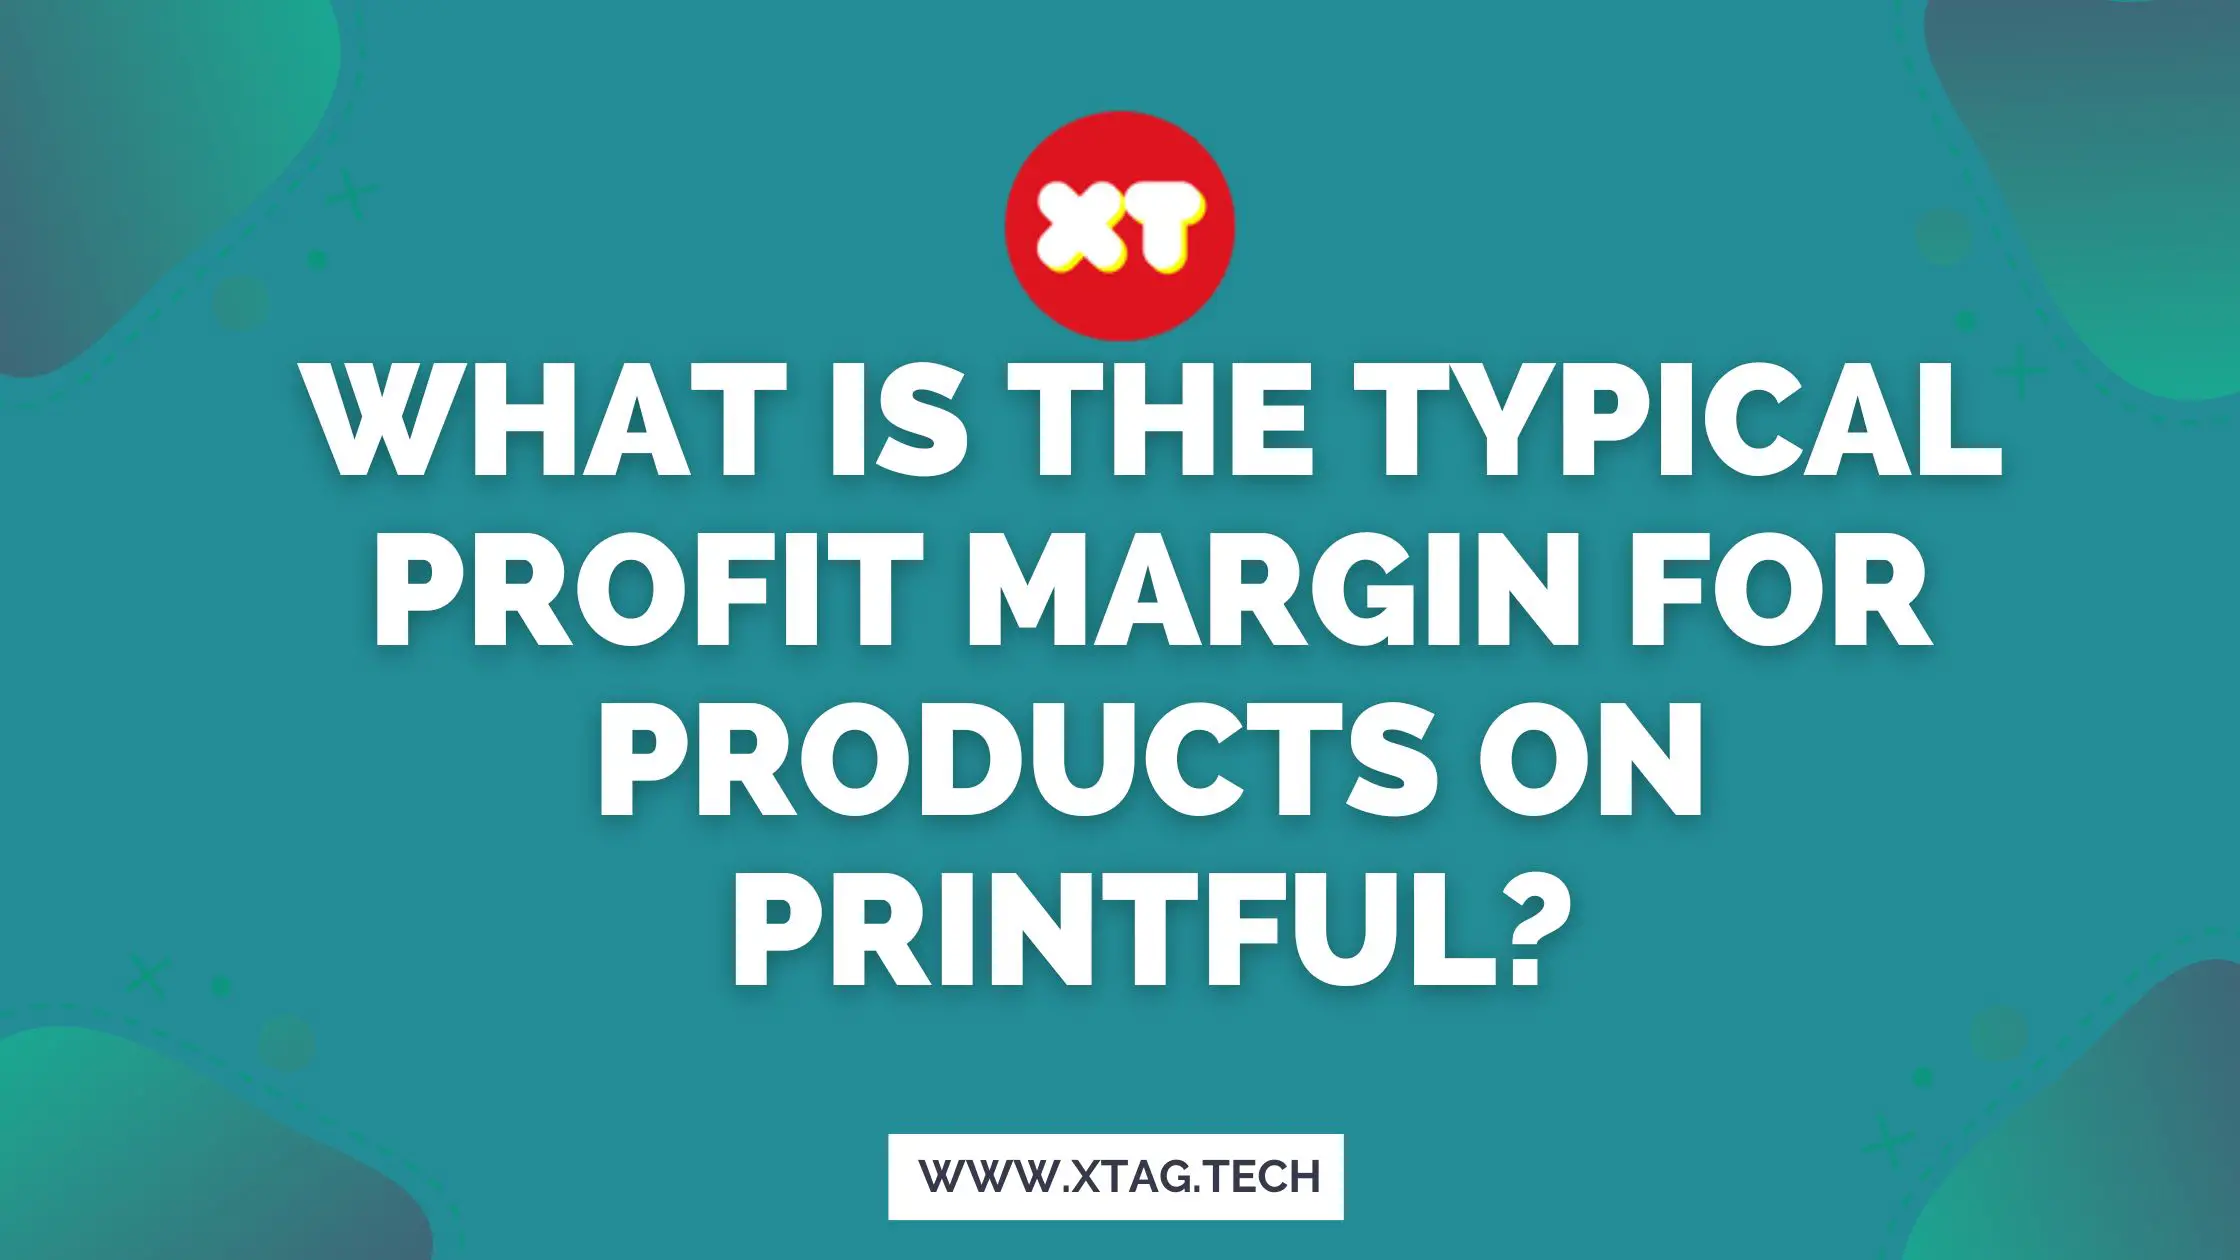 What Is The Typical Profit Margin For Products On Printful?